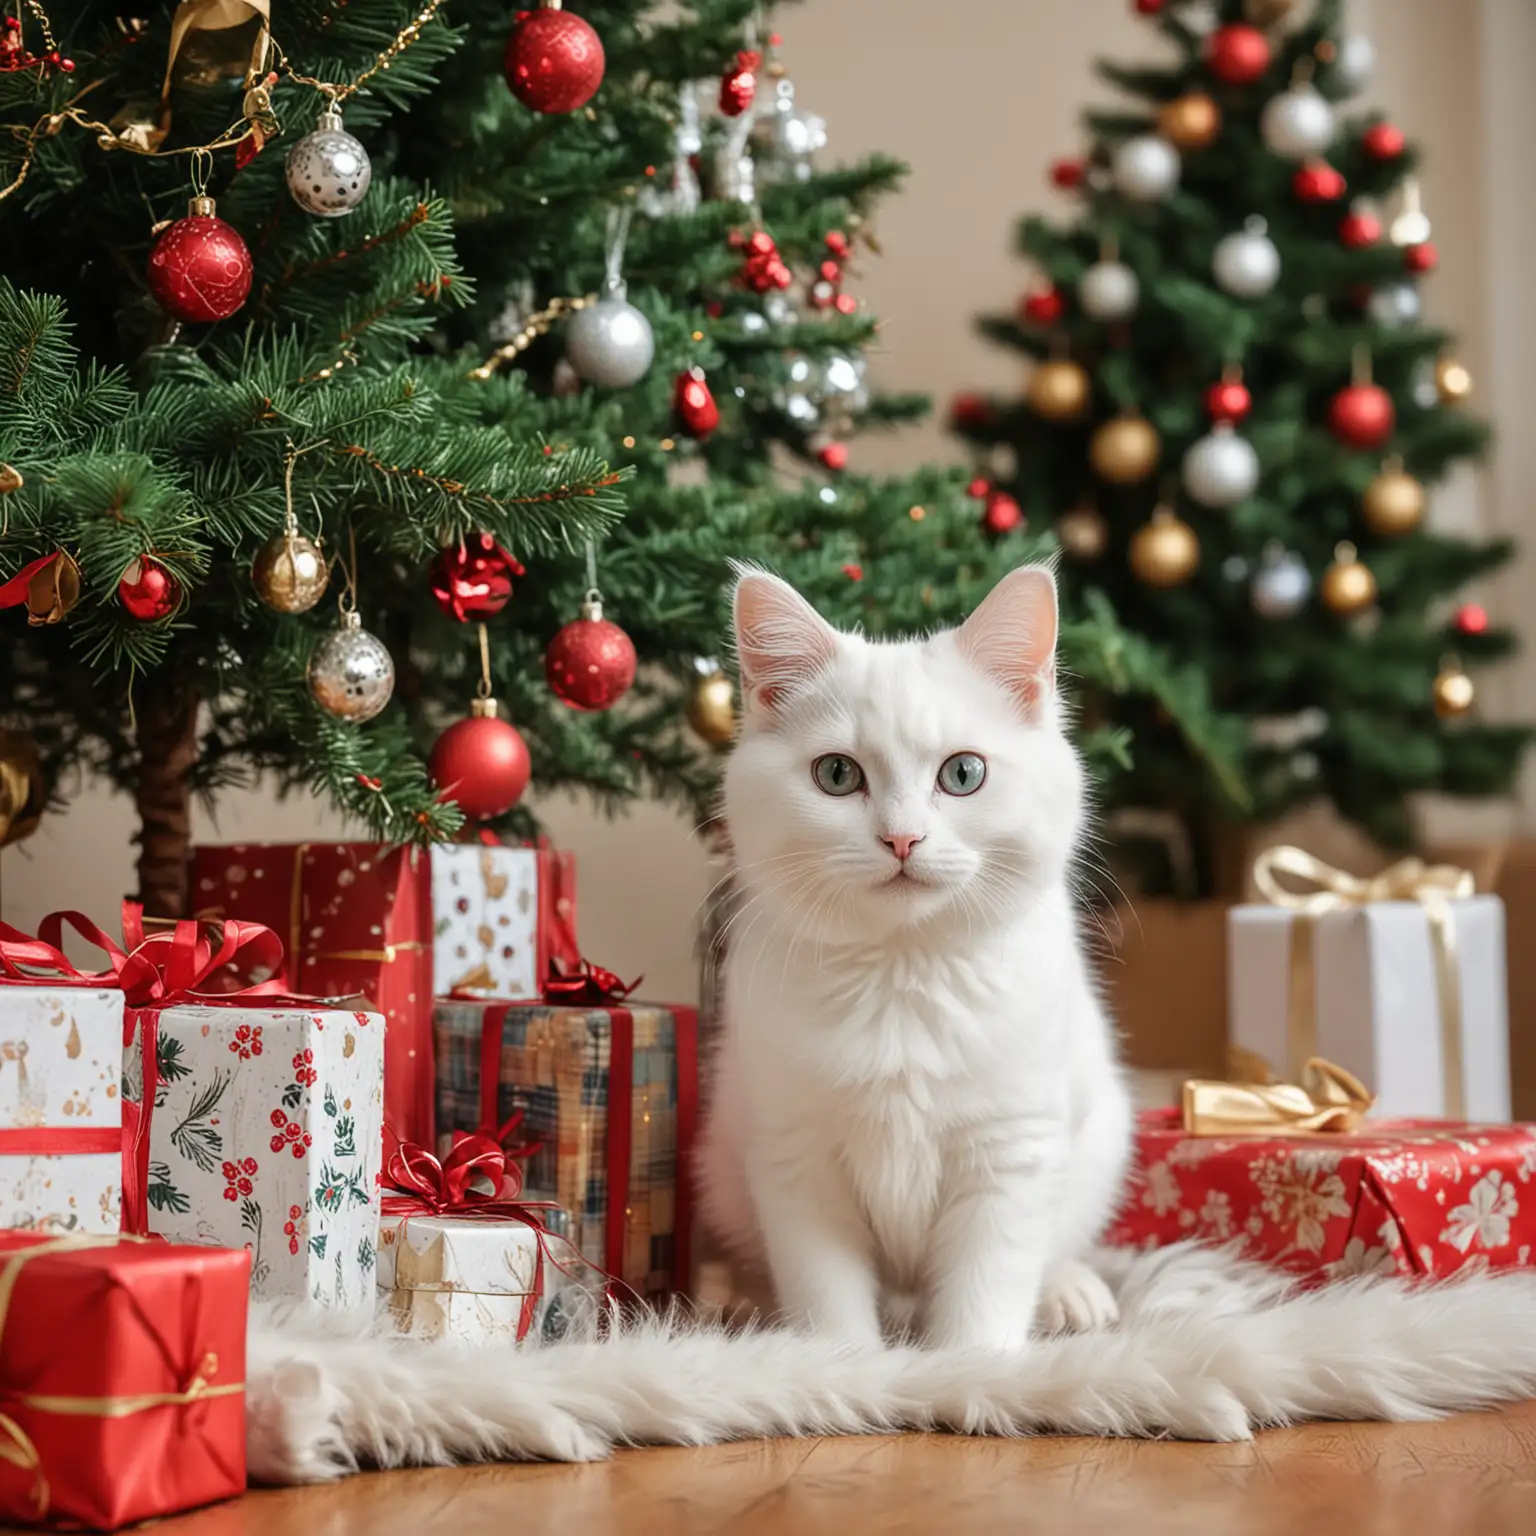 Playful White Kitten with Christmas Tree and Presents